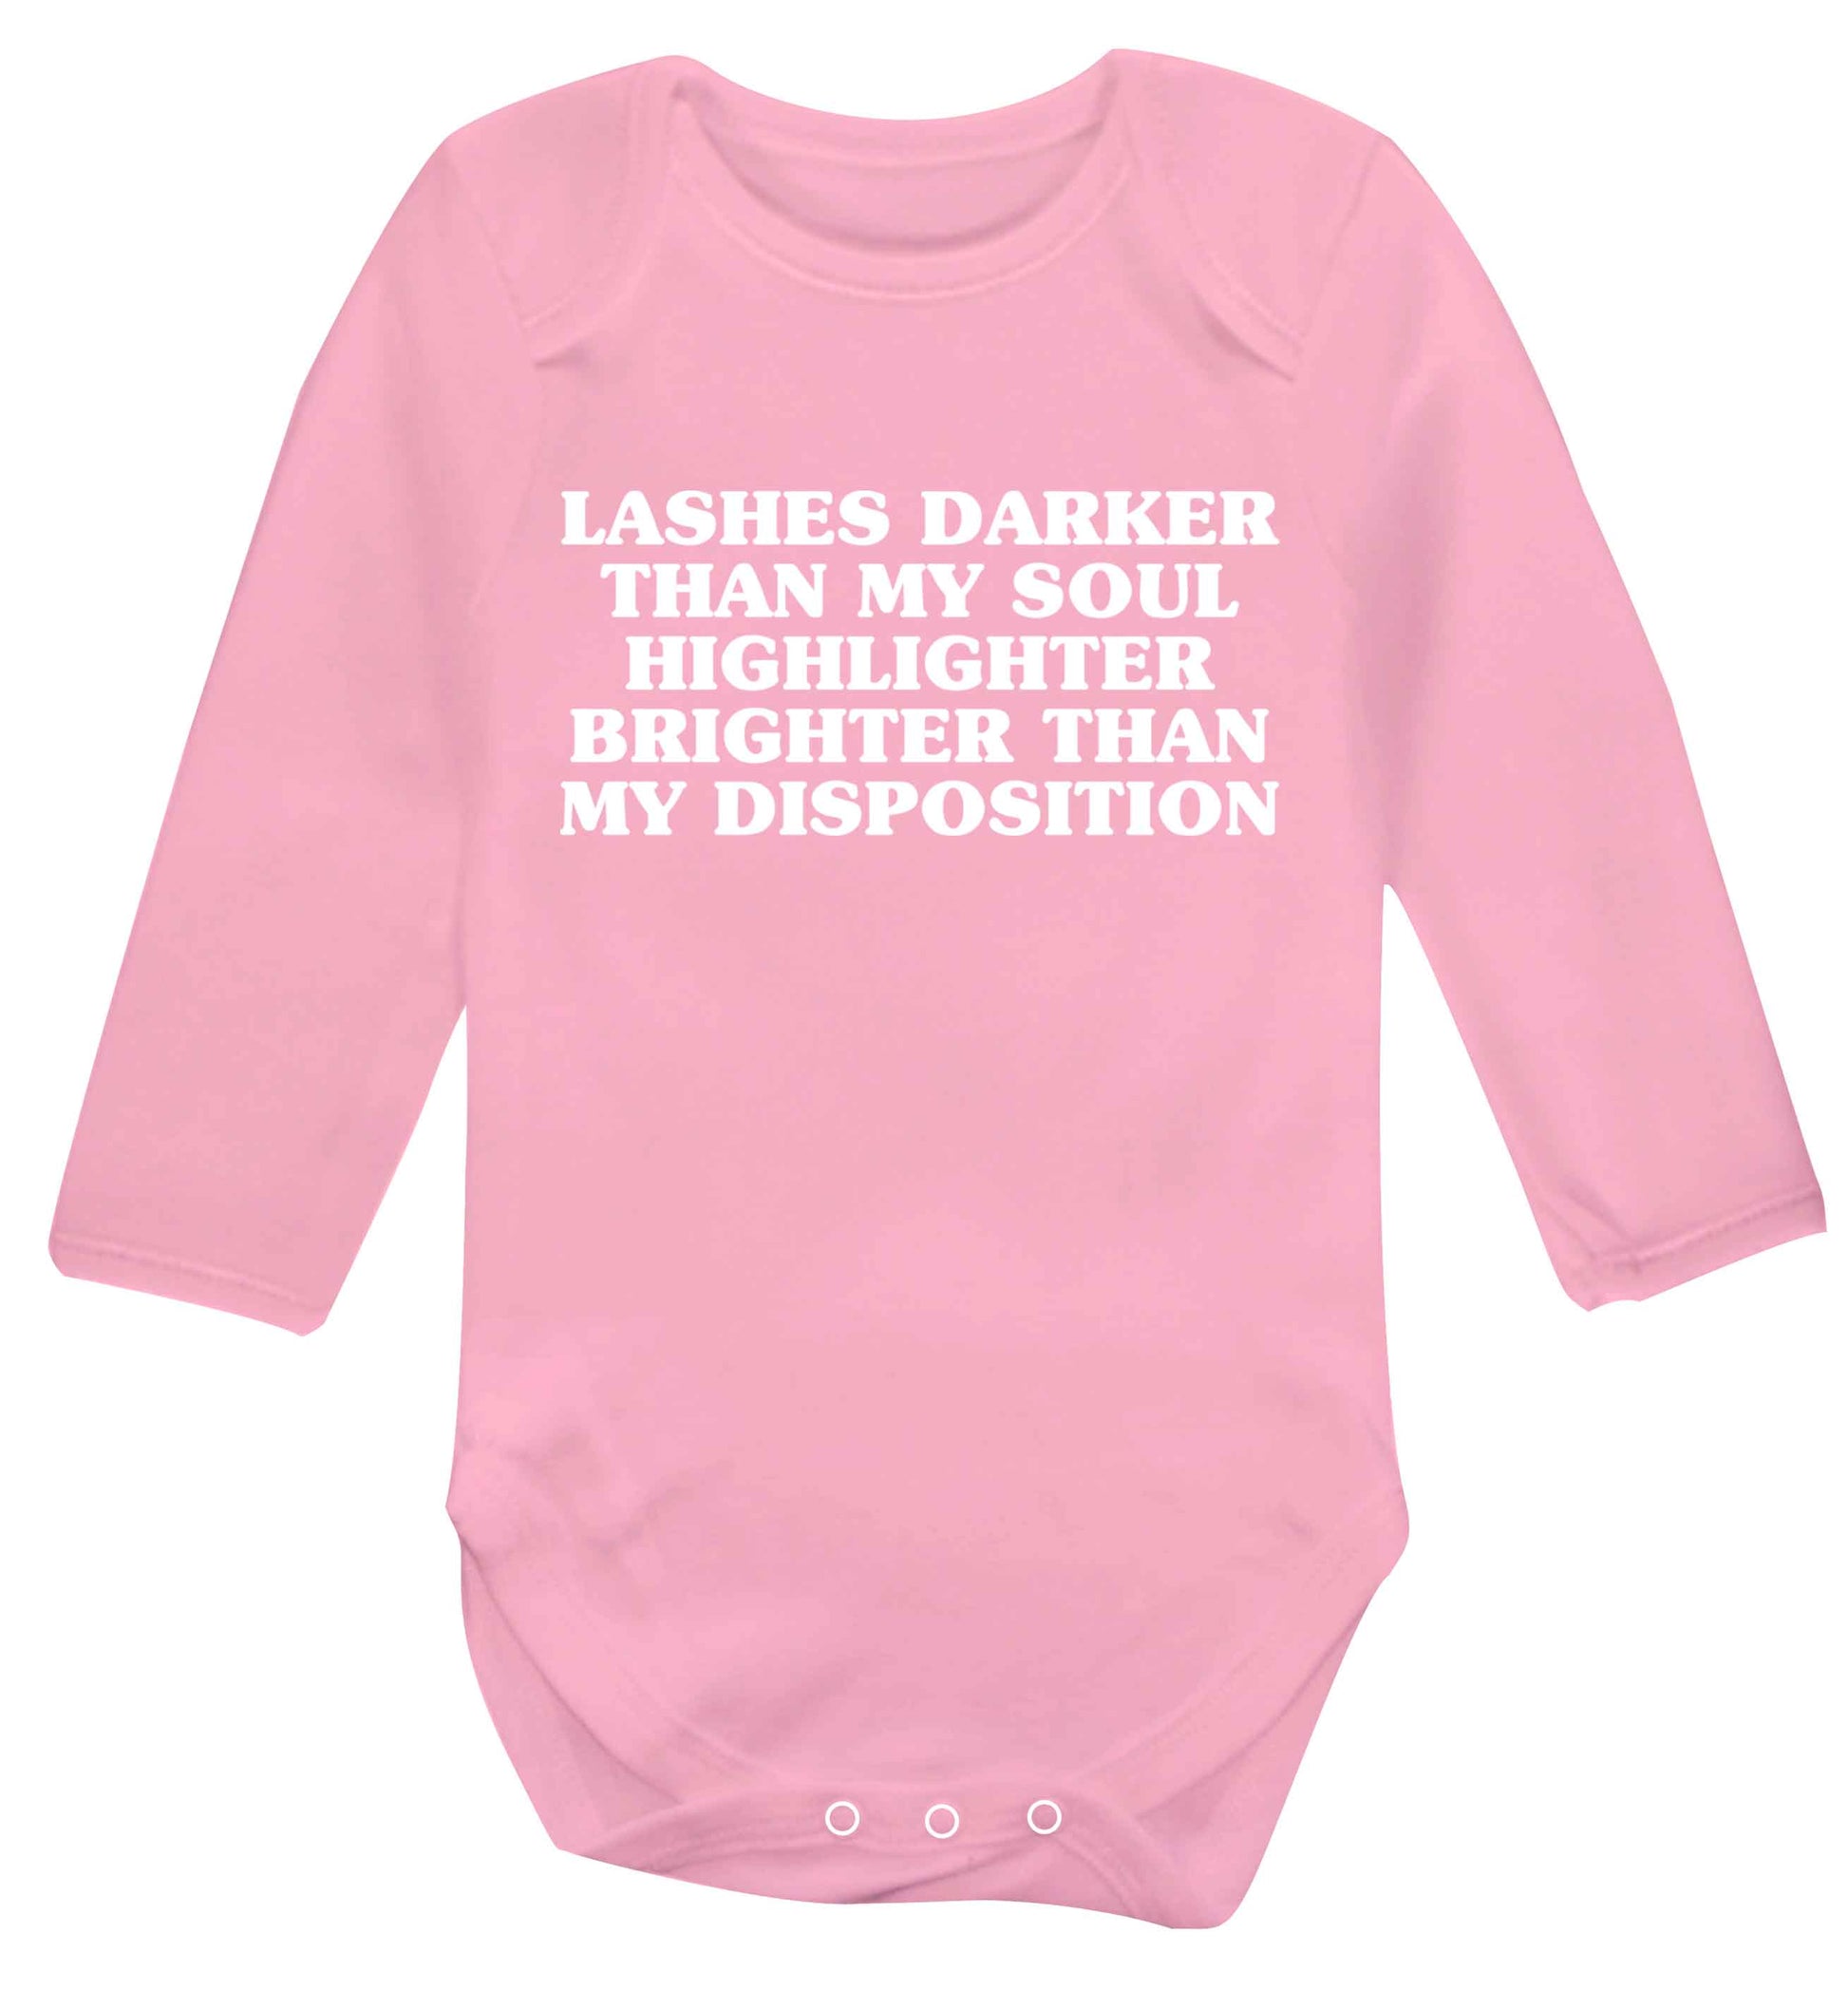 Lashes darker than my soul, highlighter brighter than my disposition Baby Vest long sleeved pale pink 6-12 months